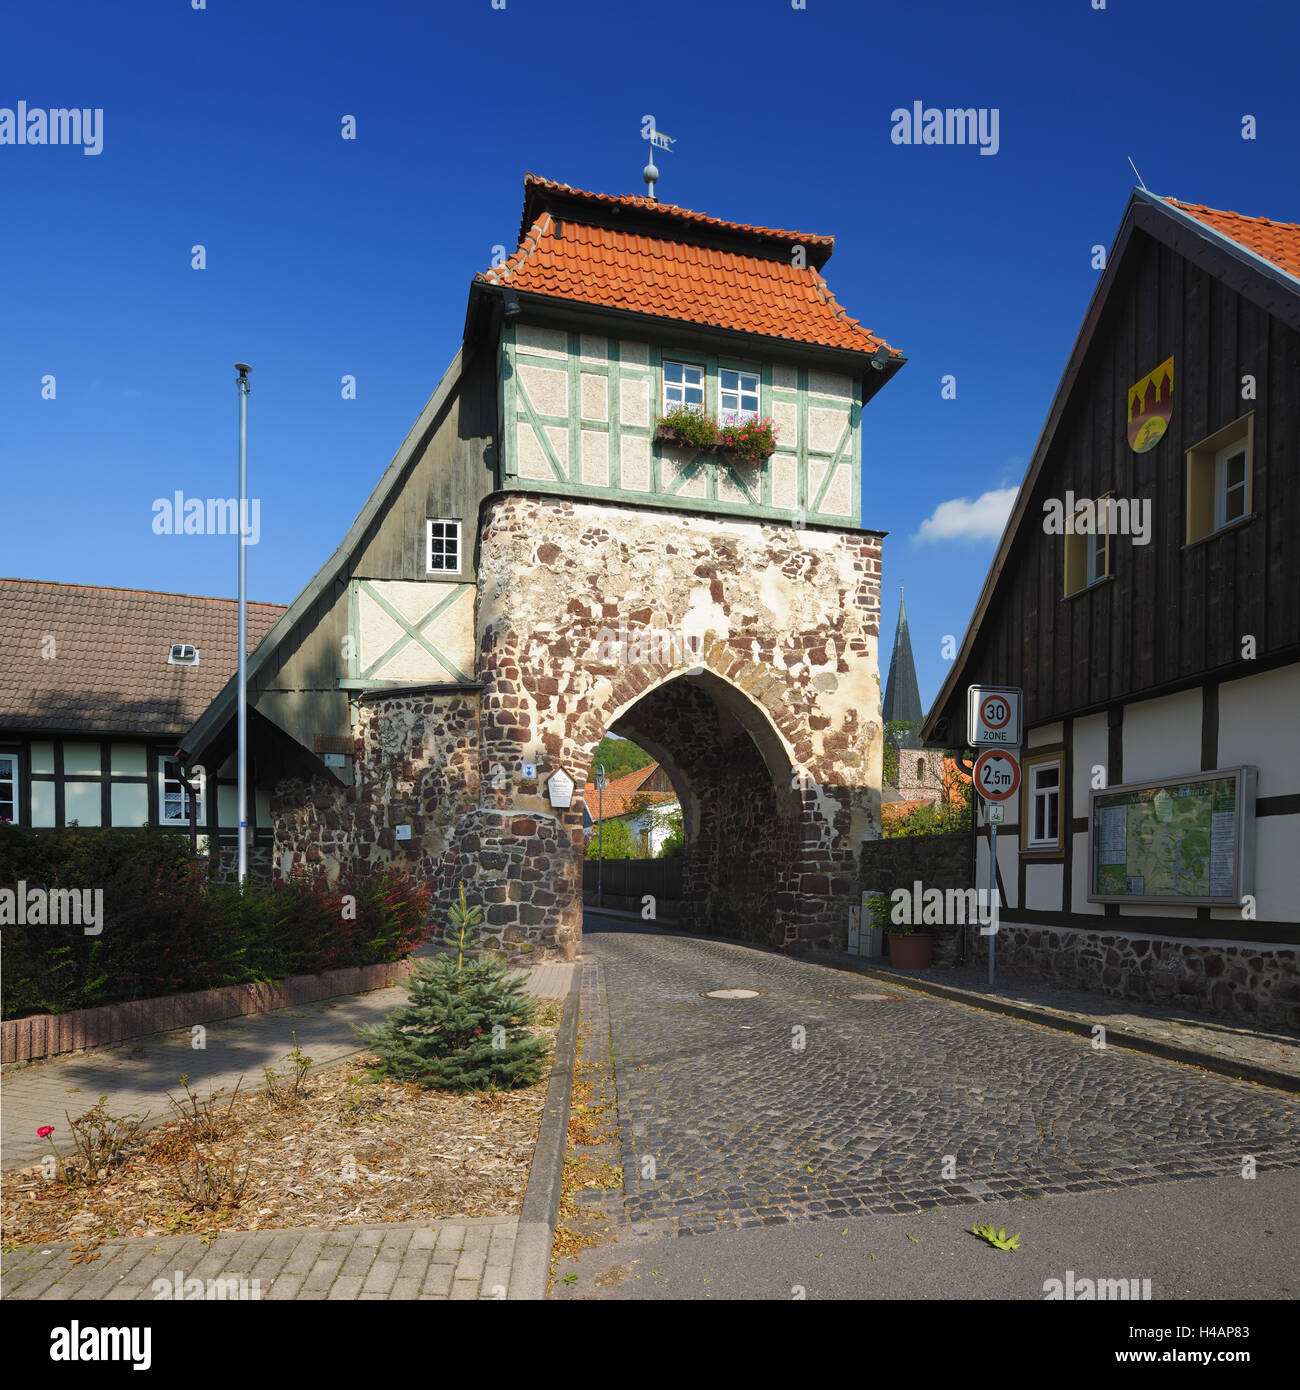 Germany, Saxony-Anhalt, Haerz, Neustadt, old gate, architectural style, half-timbered, lane, half-timbered houses, narrow, paving, cobblestones, architecture, Old Town, historical, medieval, south Harz, romantical, typical, Idyll, tourism, place of intere Stock Photo